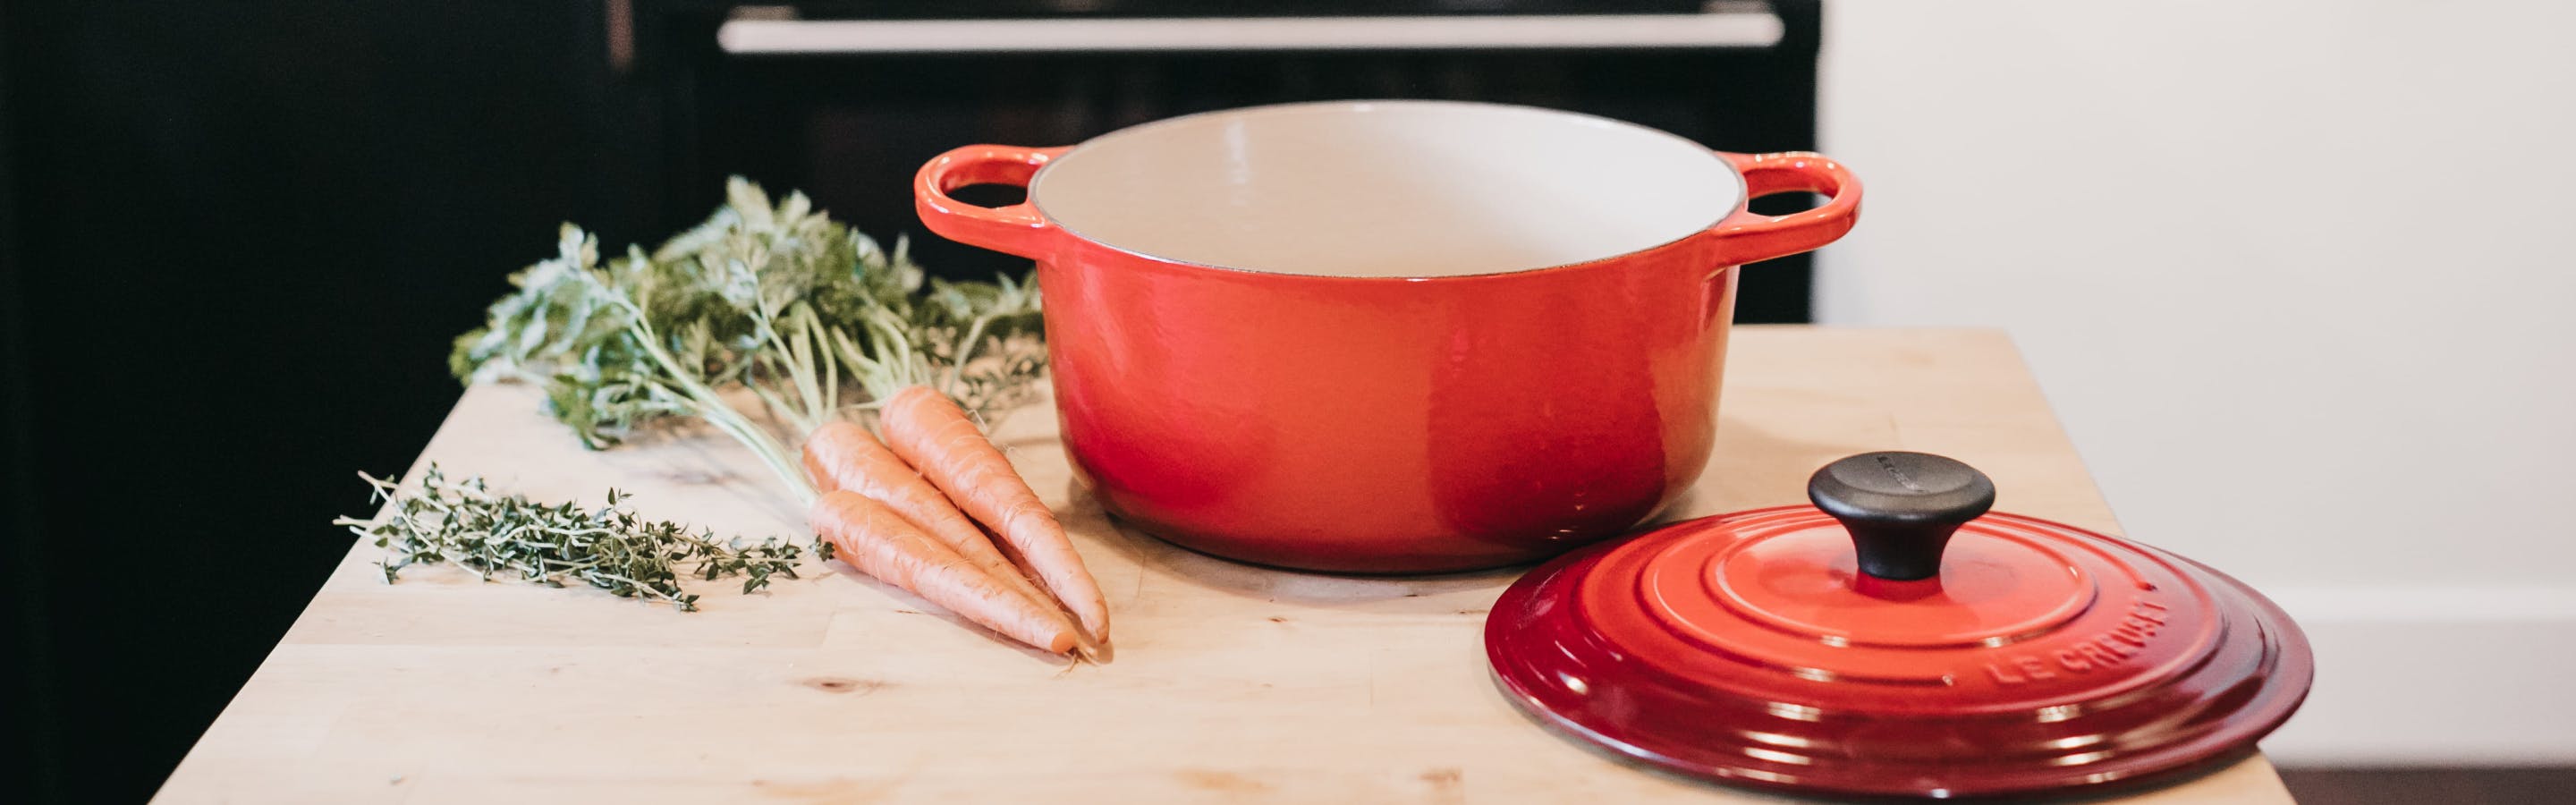 Things You Should Know Before Buying Le Creuset Cookware